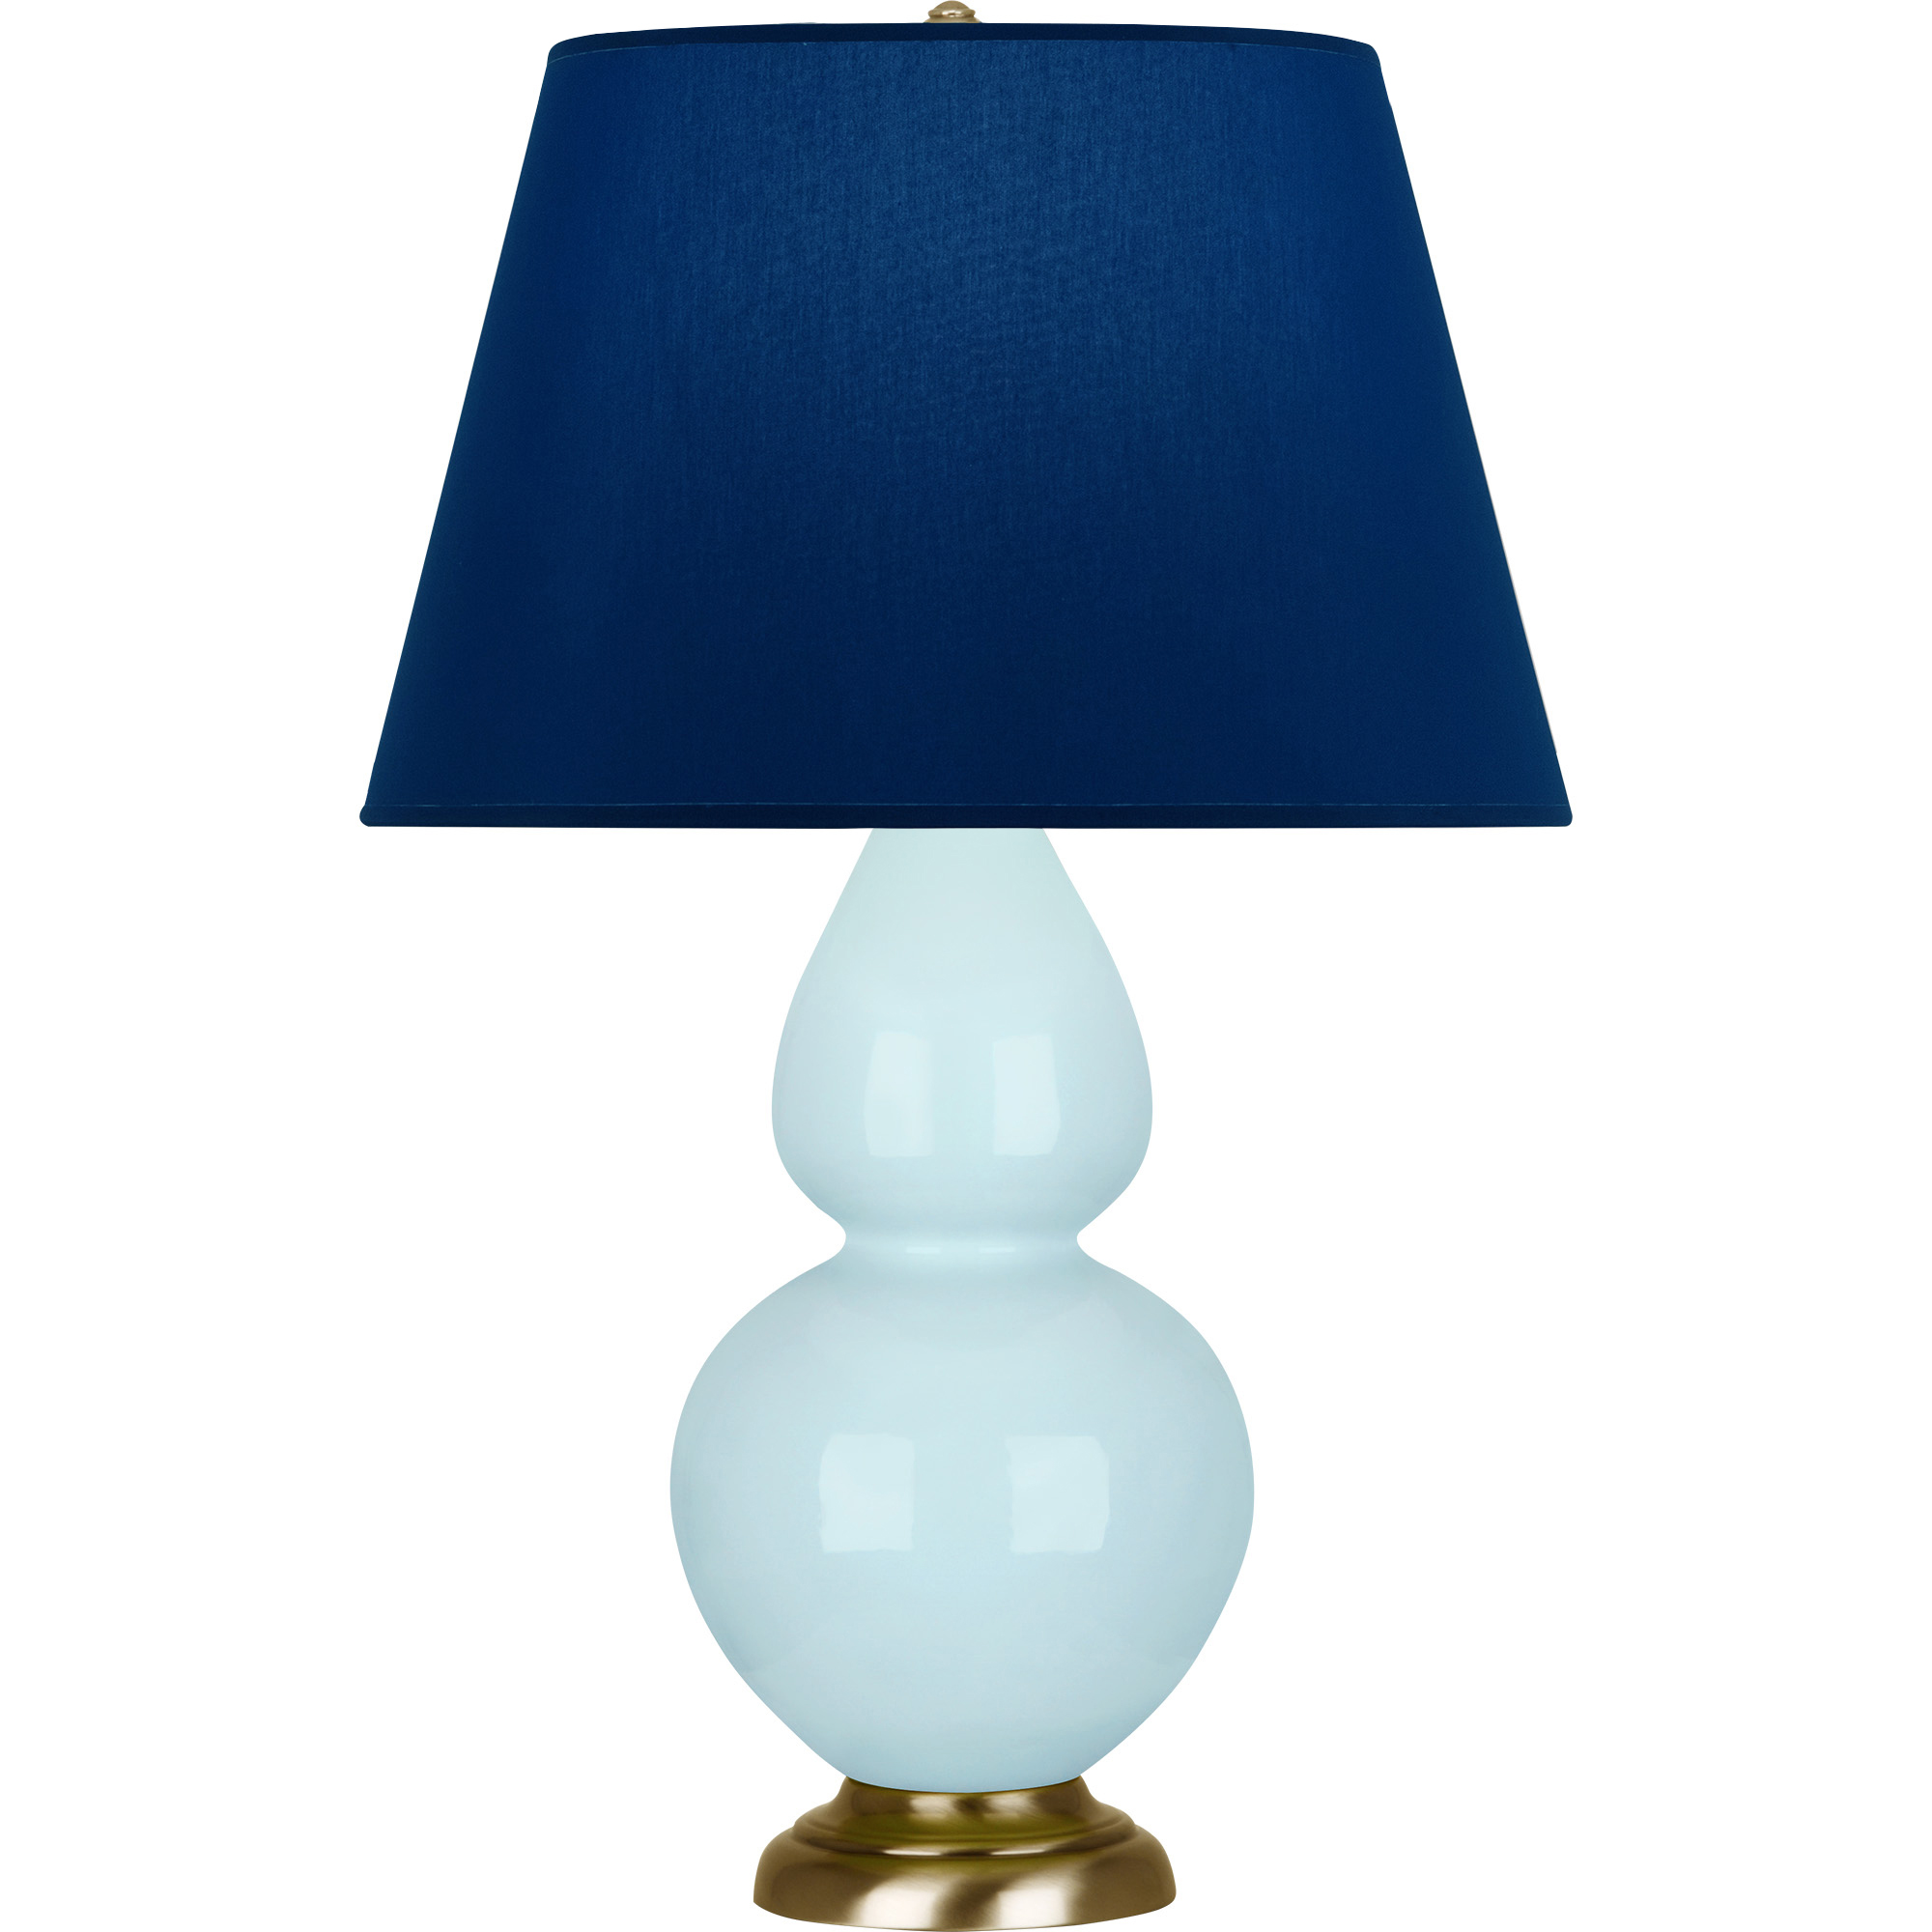 Double Gourd Table Lamp Style #1666N